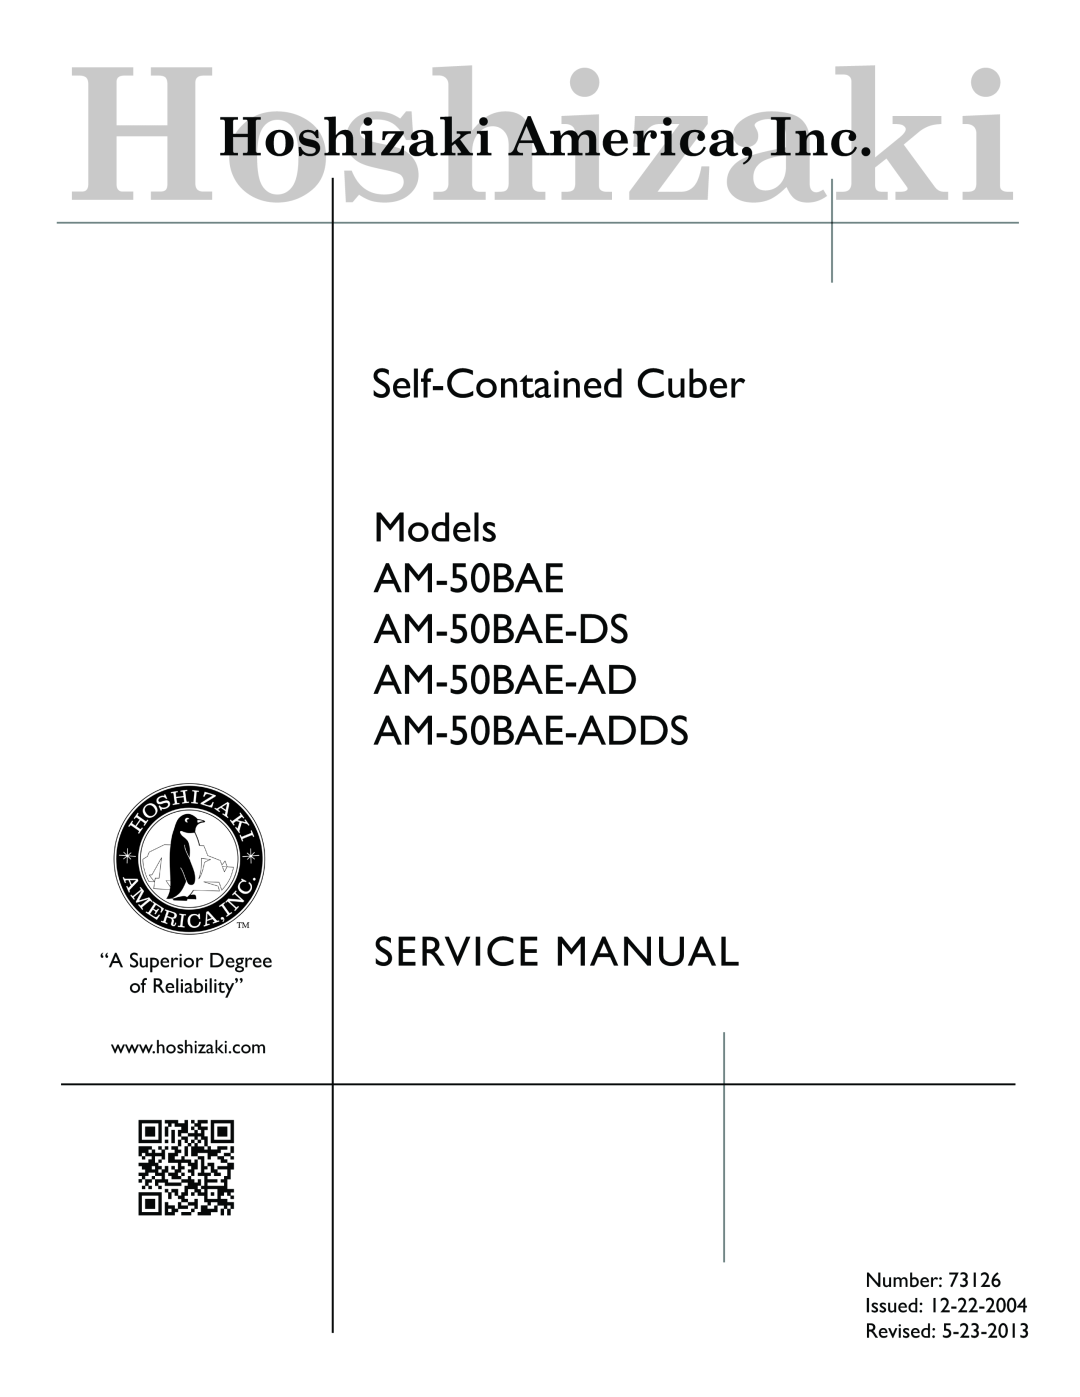 Hoshizaki AM-50BAE-ADDS instruction manual Self-ContainedCuber Models AM-50BAE AM-50BAE-DS, Issued Revised 